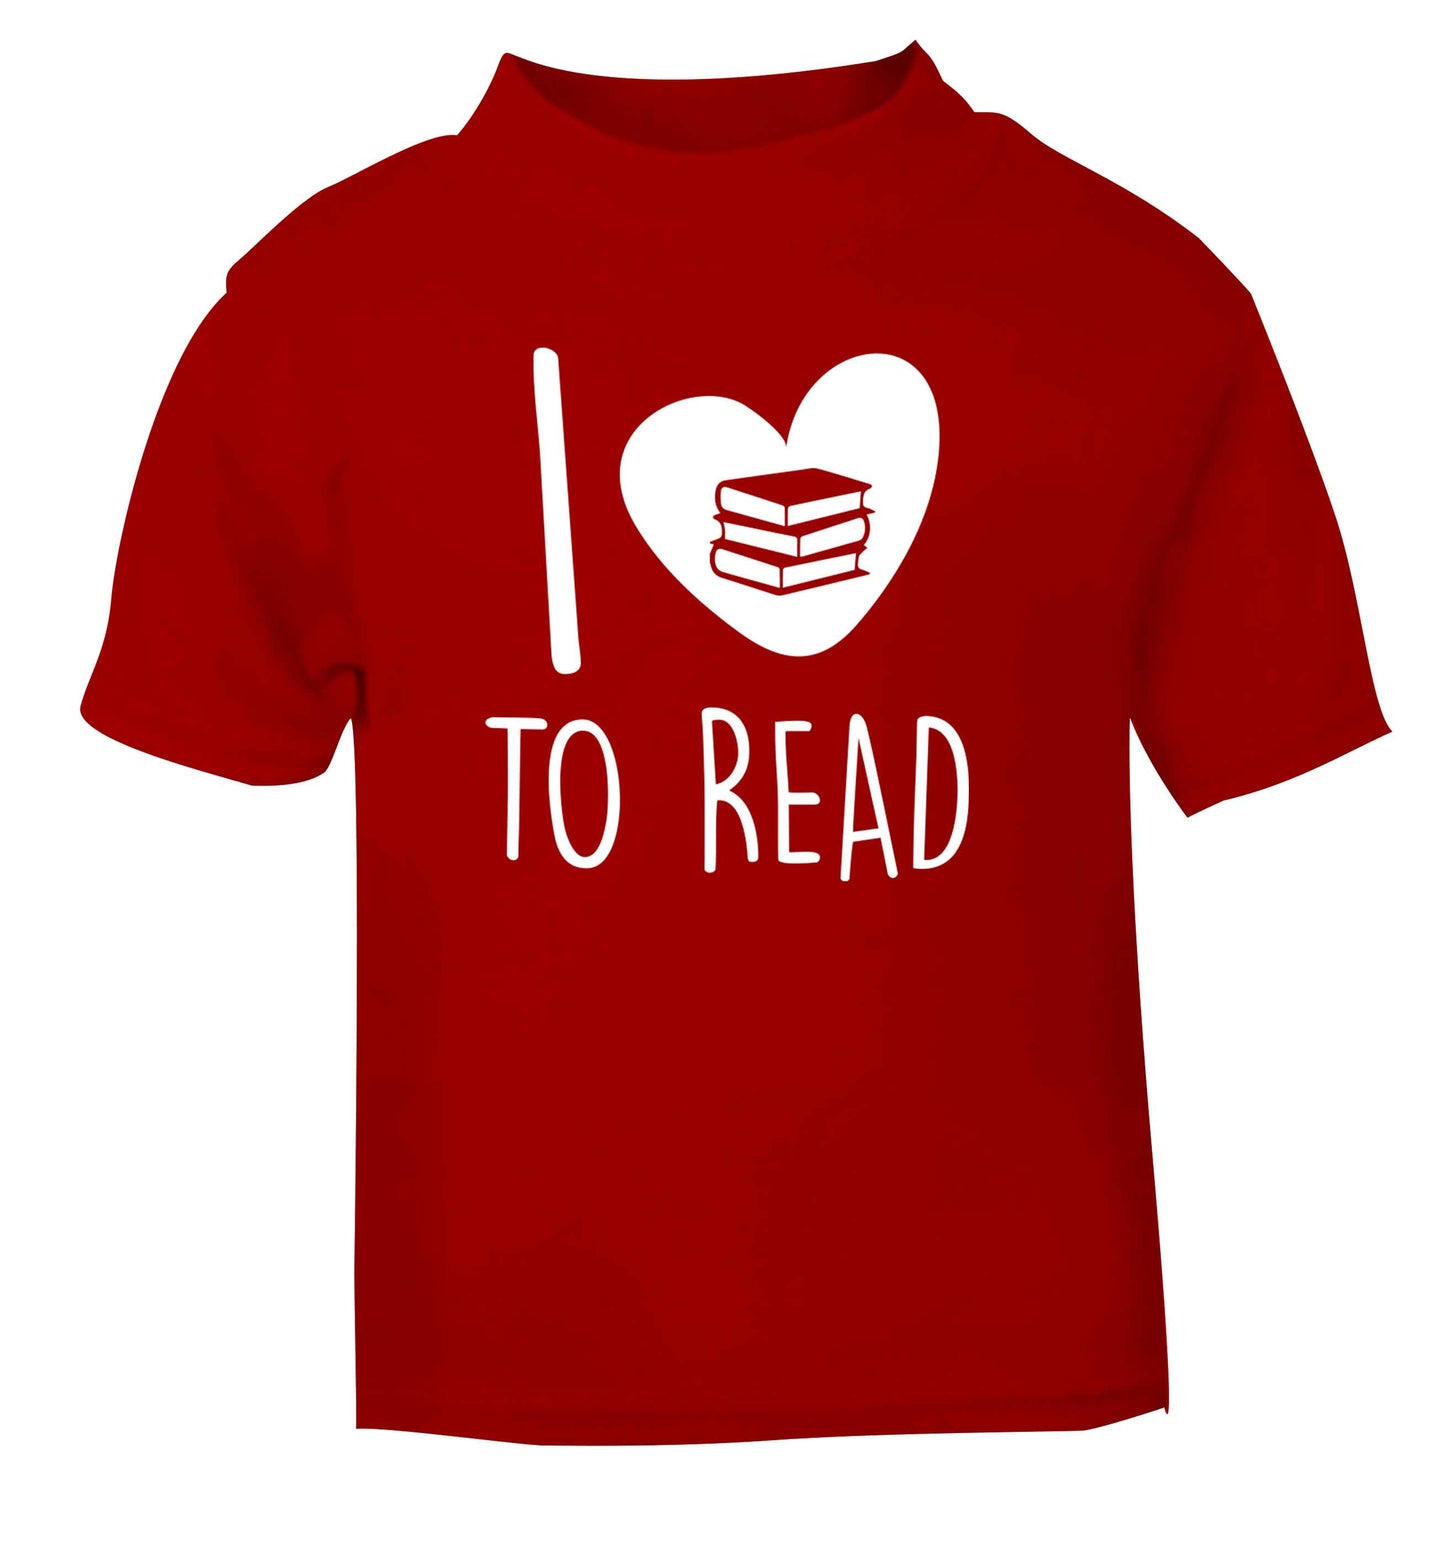 I love to read red Baby Toddler Tshirt 2 Years